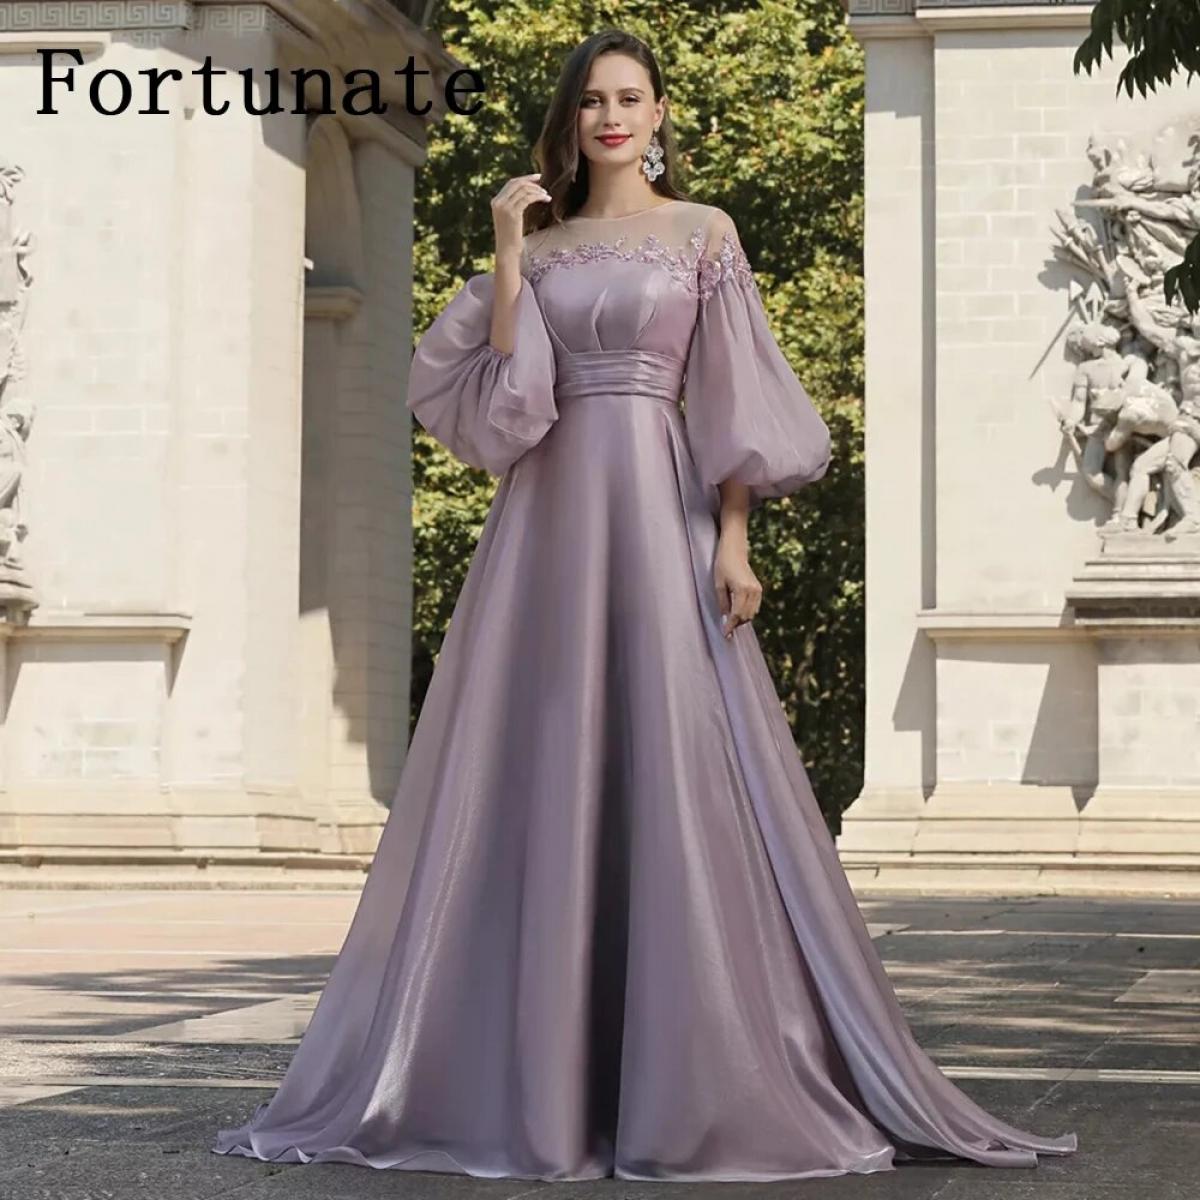 Elegant O Neck Long Evening Dress With Puffy Sleeves A Line Lace Soft Satin Prom Party Gown 2022 Custom Made  Evening Dr